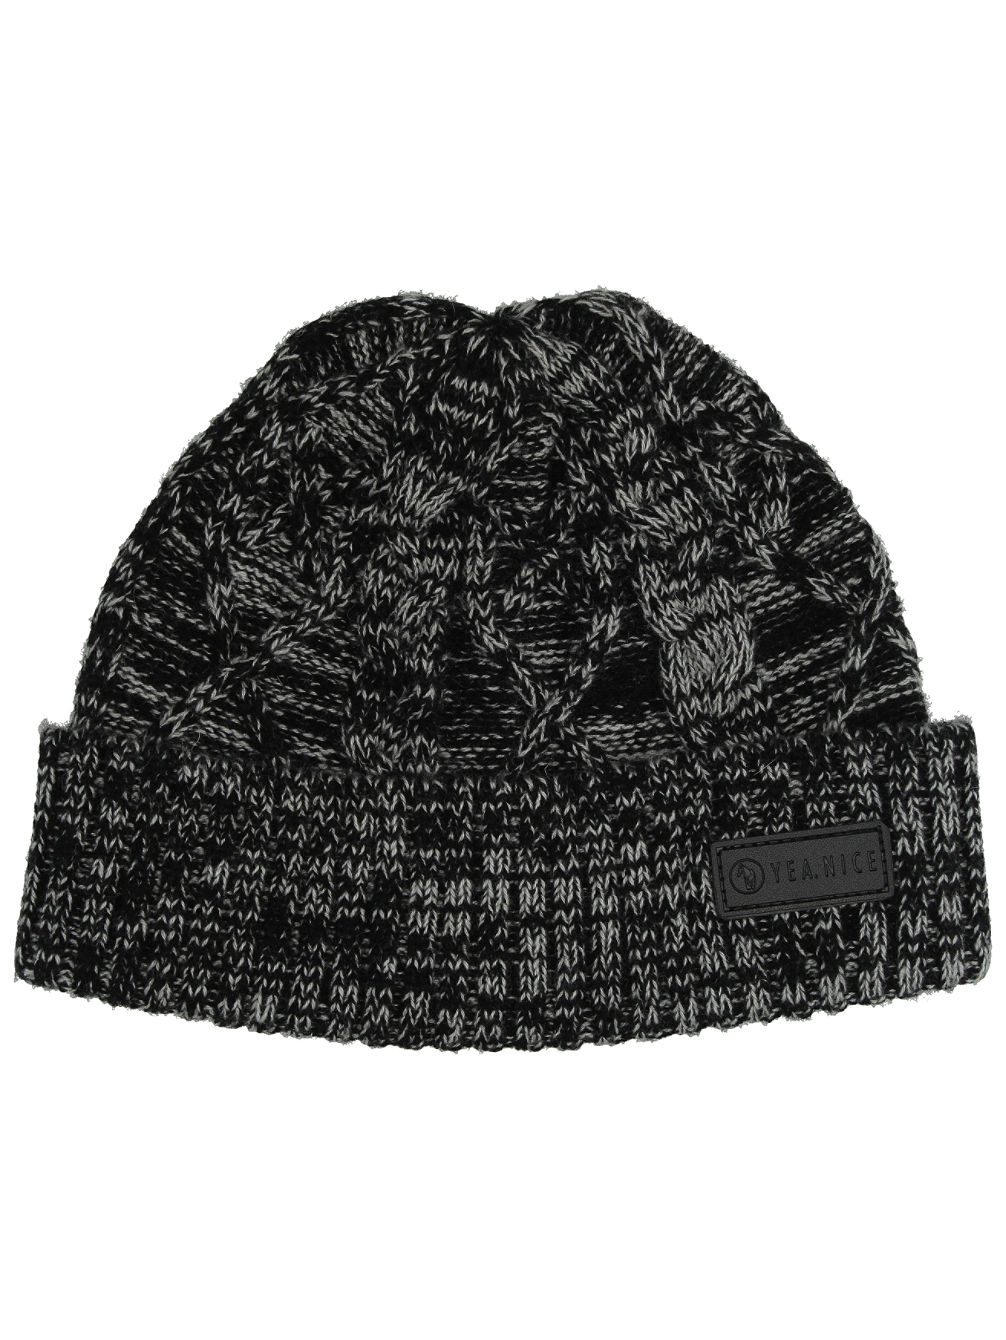 The Cable Gorro